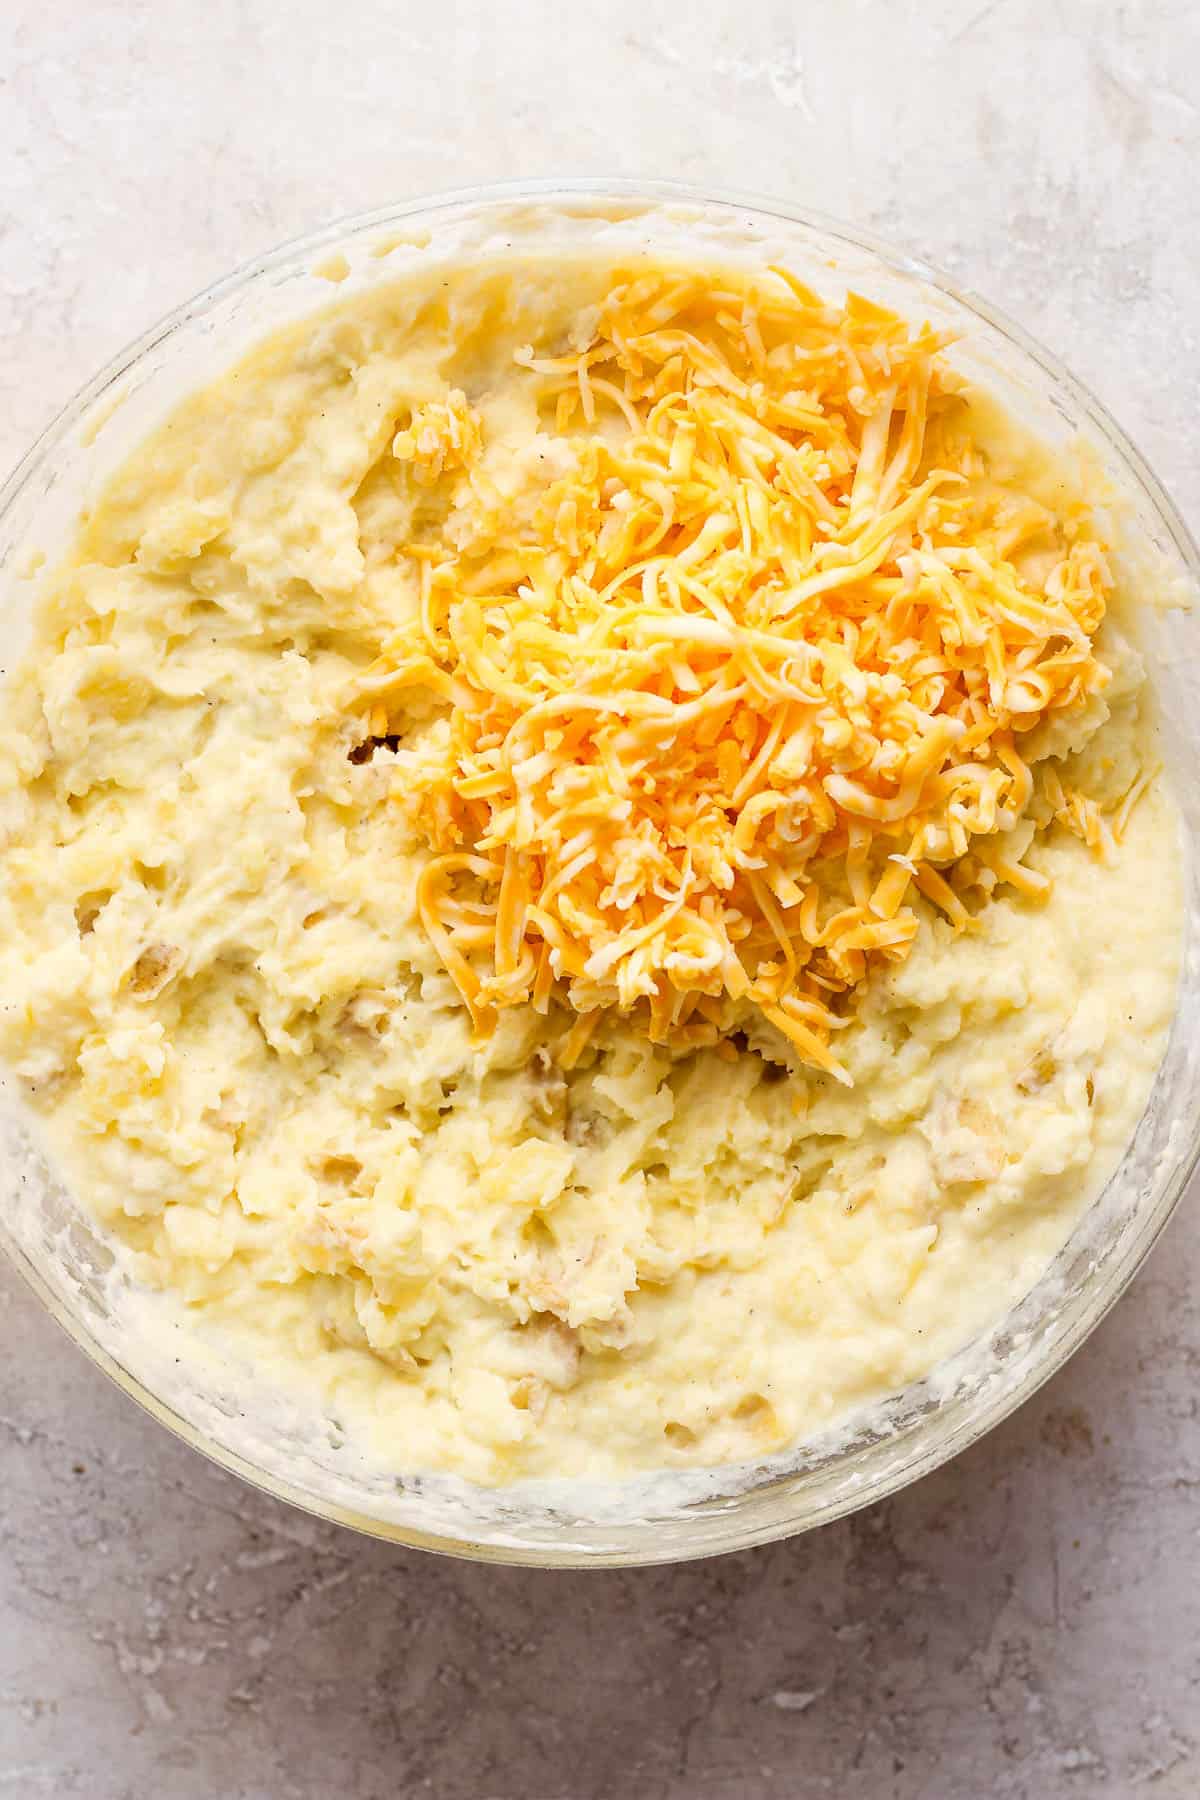 A half cup of the shredded cheese added to the mashed potatoes.